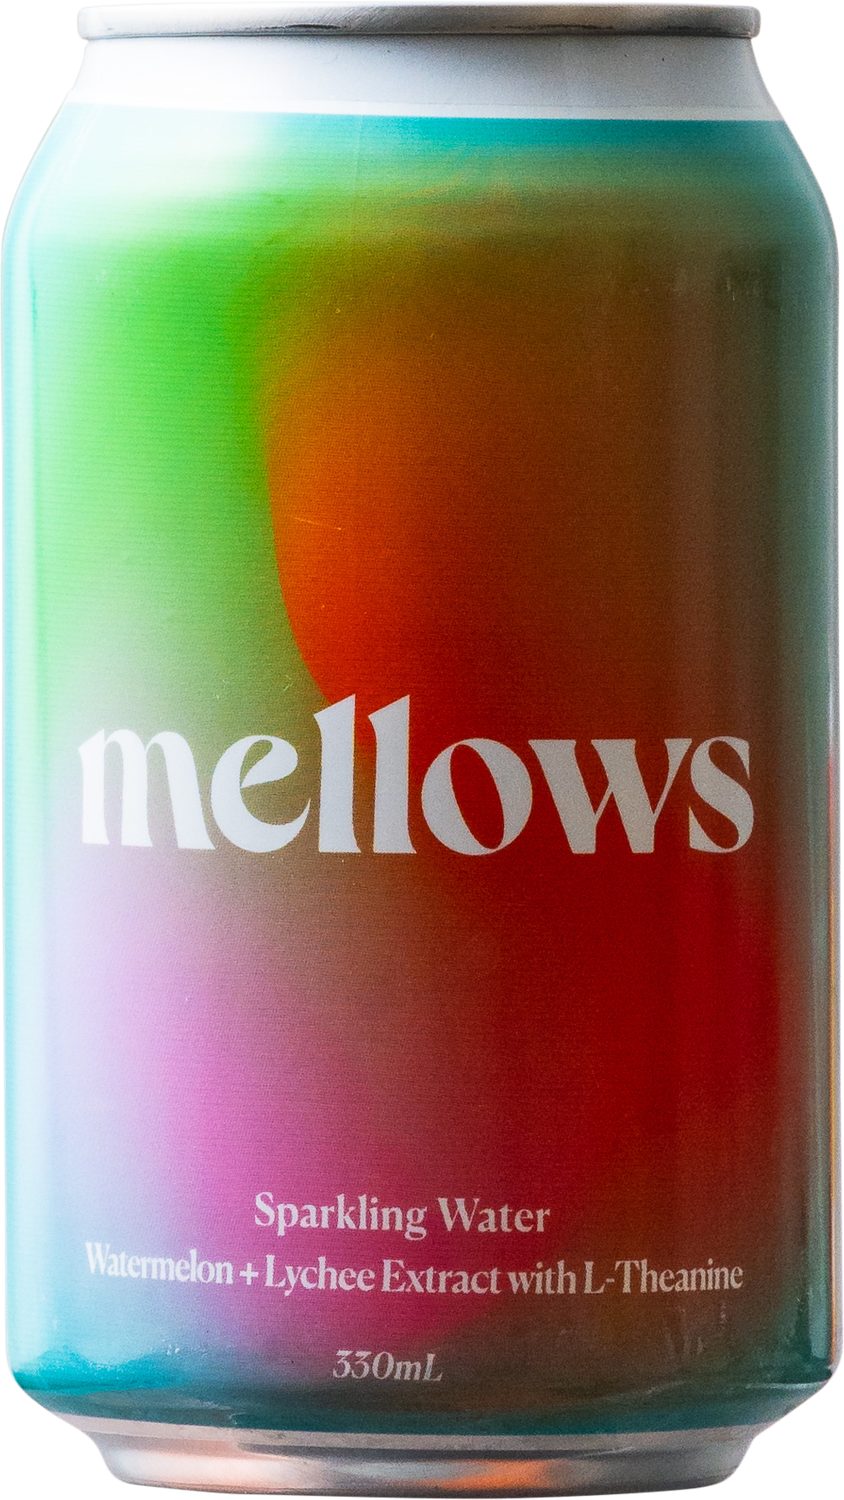 Mellows - Watermelon + Lychee Extract with L-Theanine Sparkling Water”